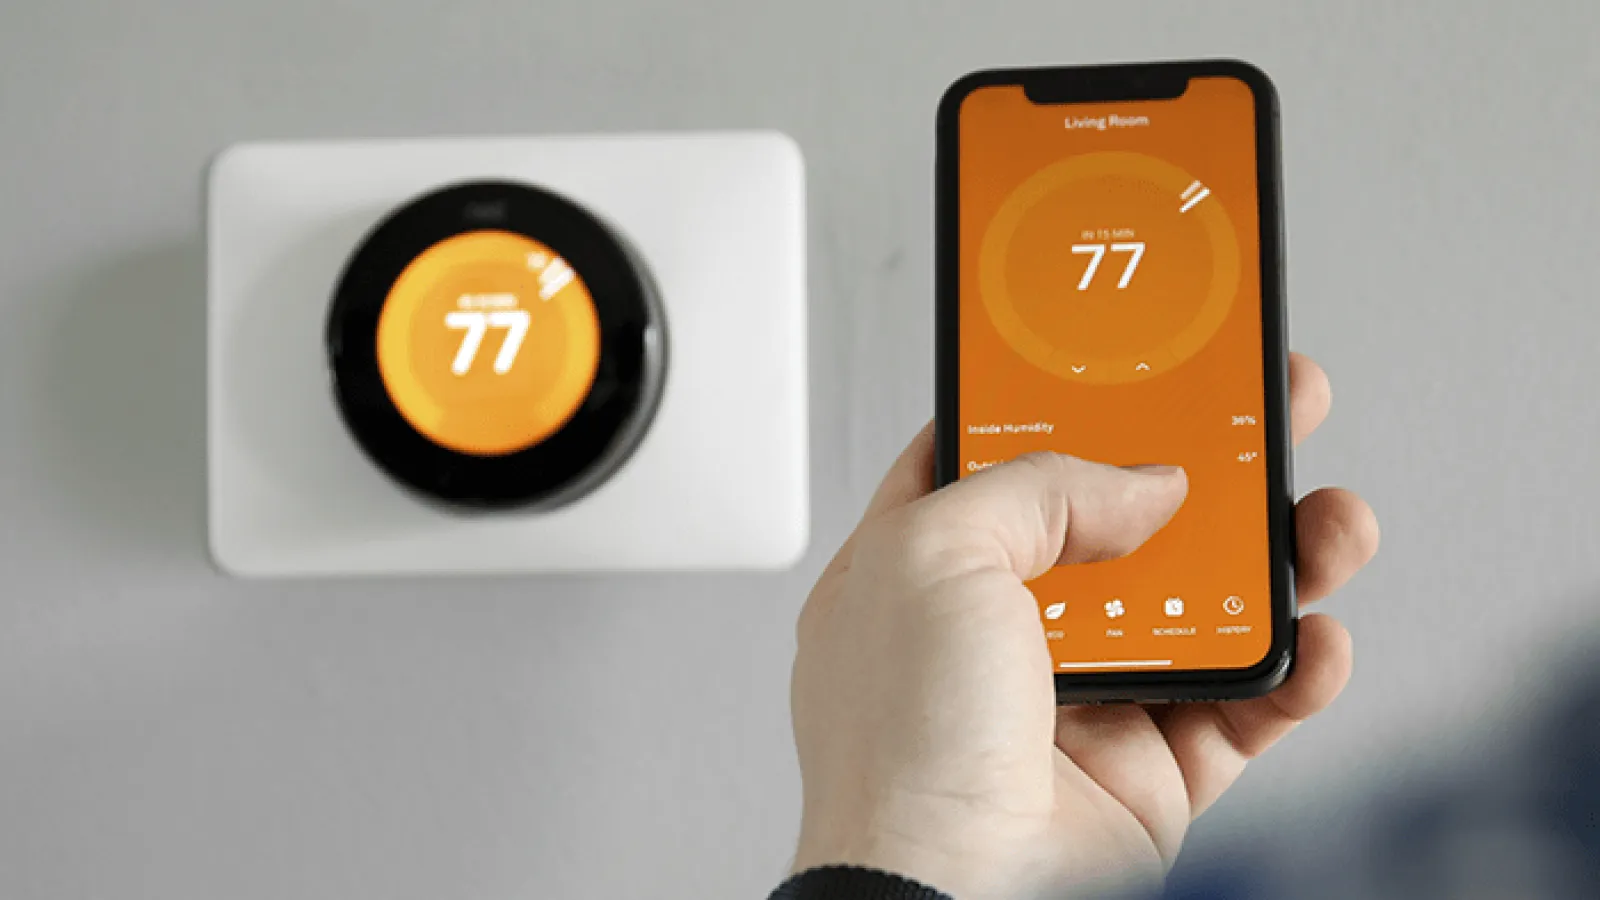 What Are the Benefits of Smart Home Technology?